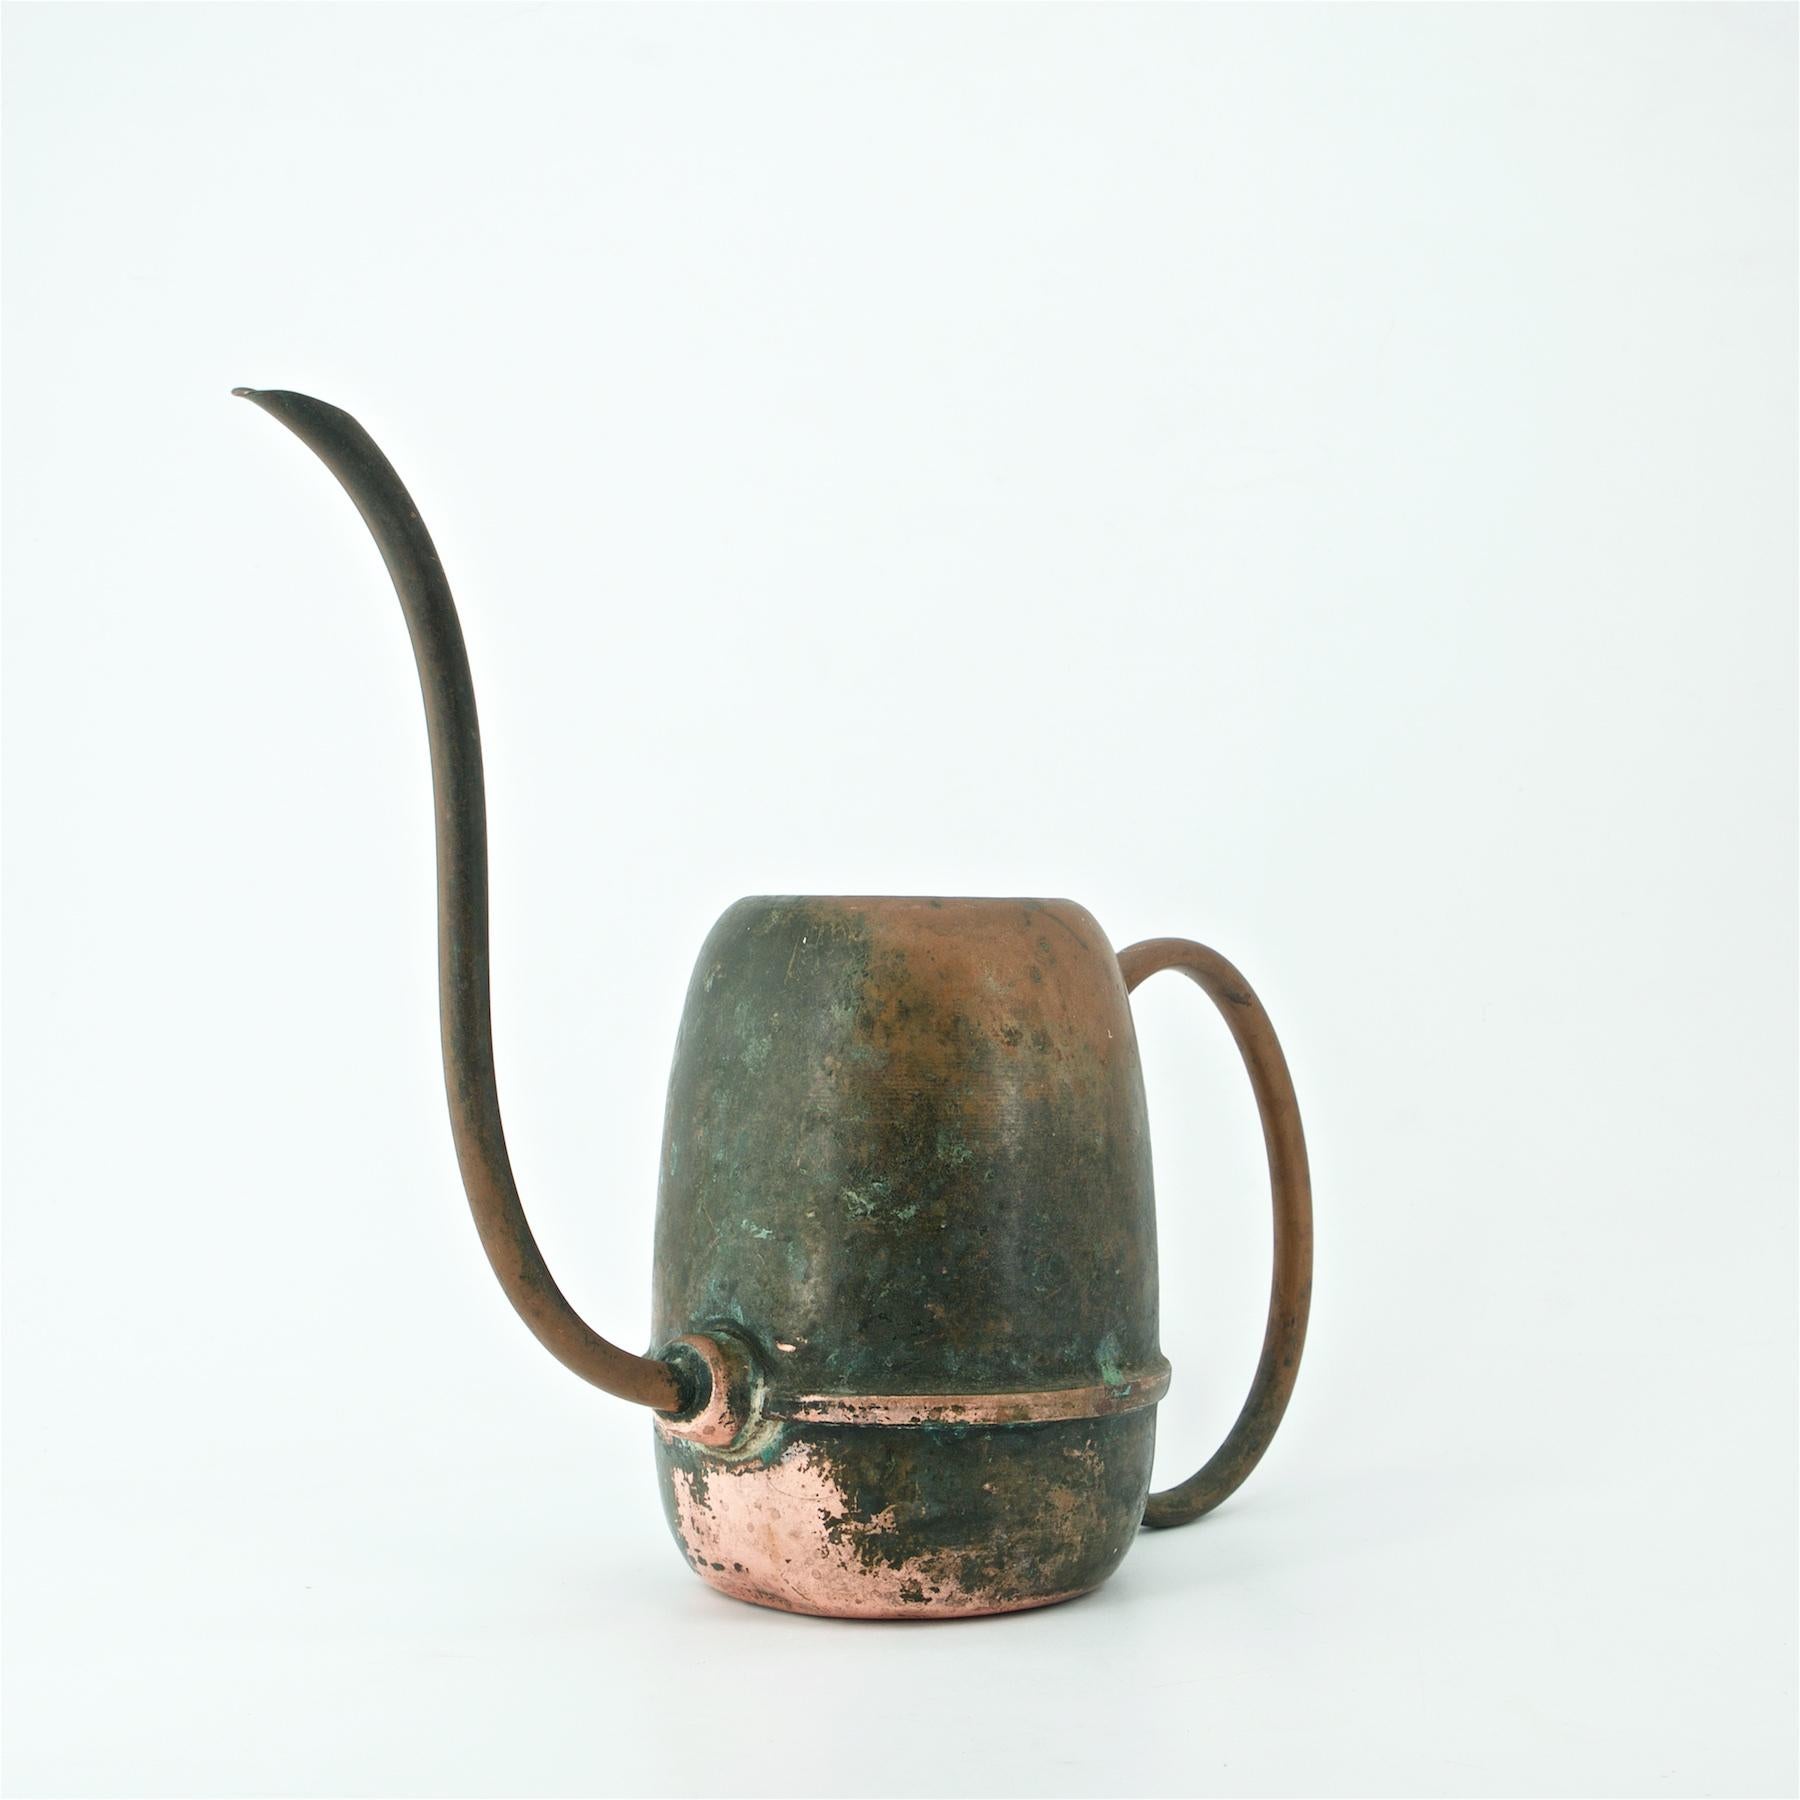 Wonderful functioning copper watering can, early 1900s. Unmarked.